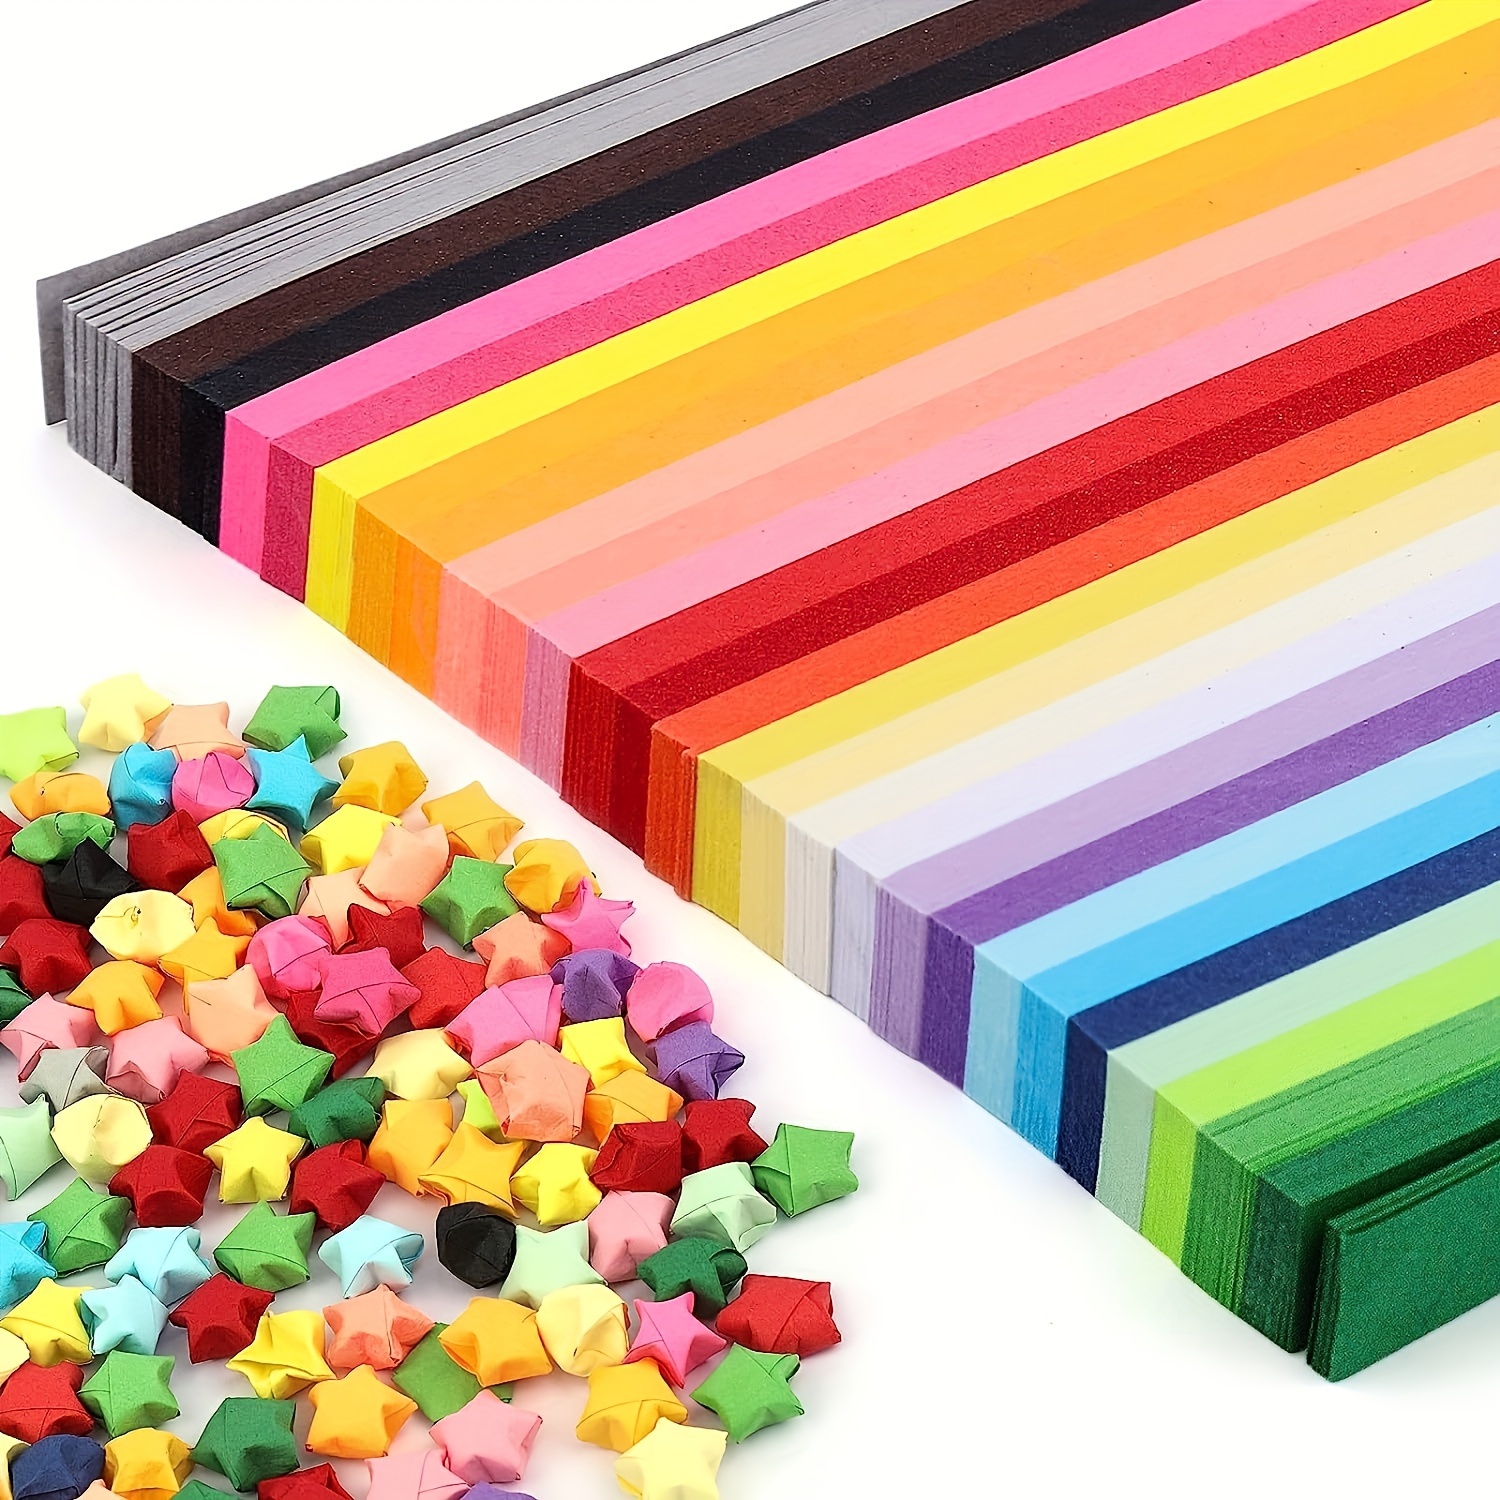 540 Sheets Colorful Origami Stars Paper Creative Multiple Color